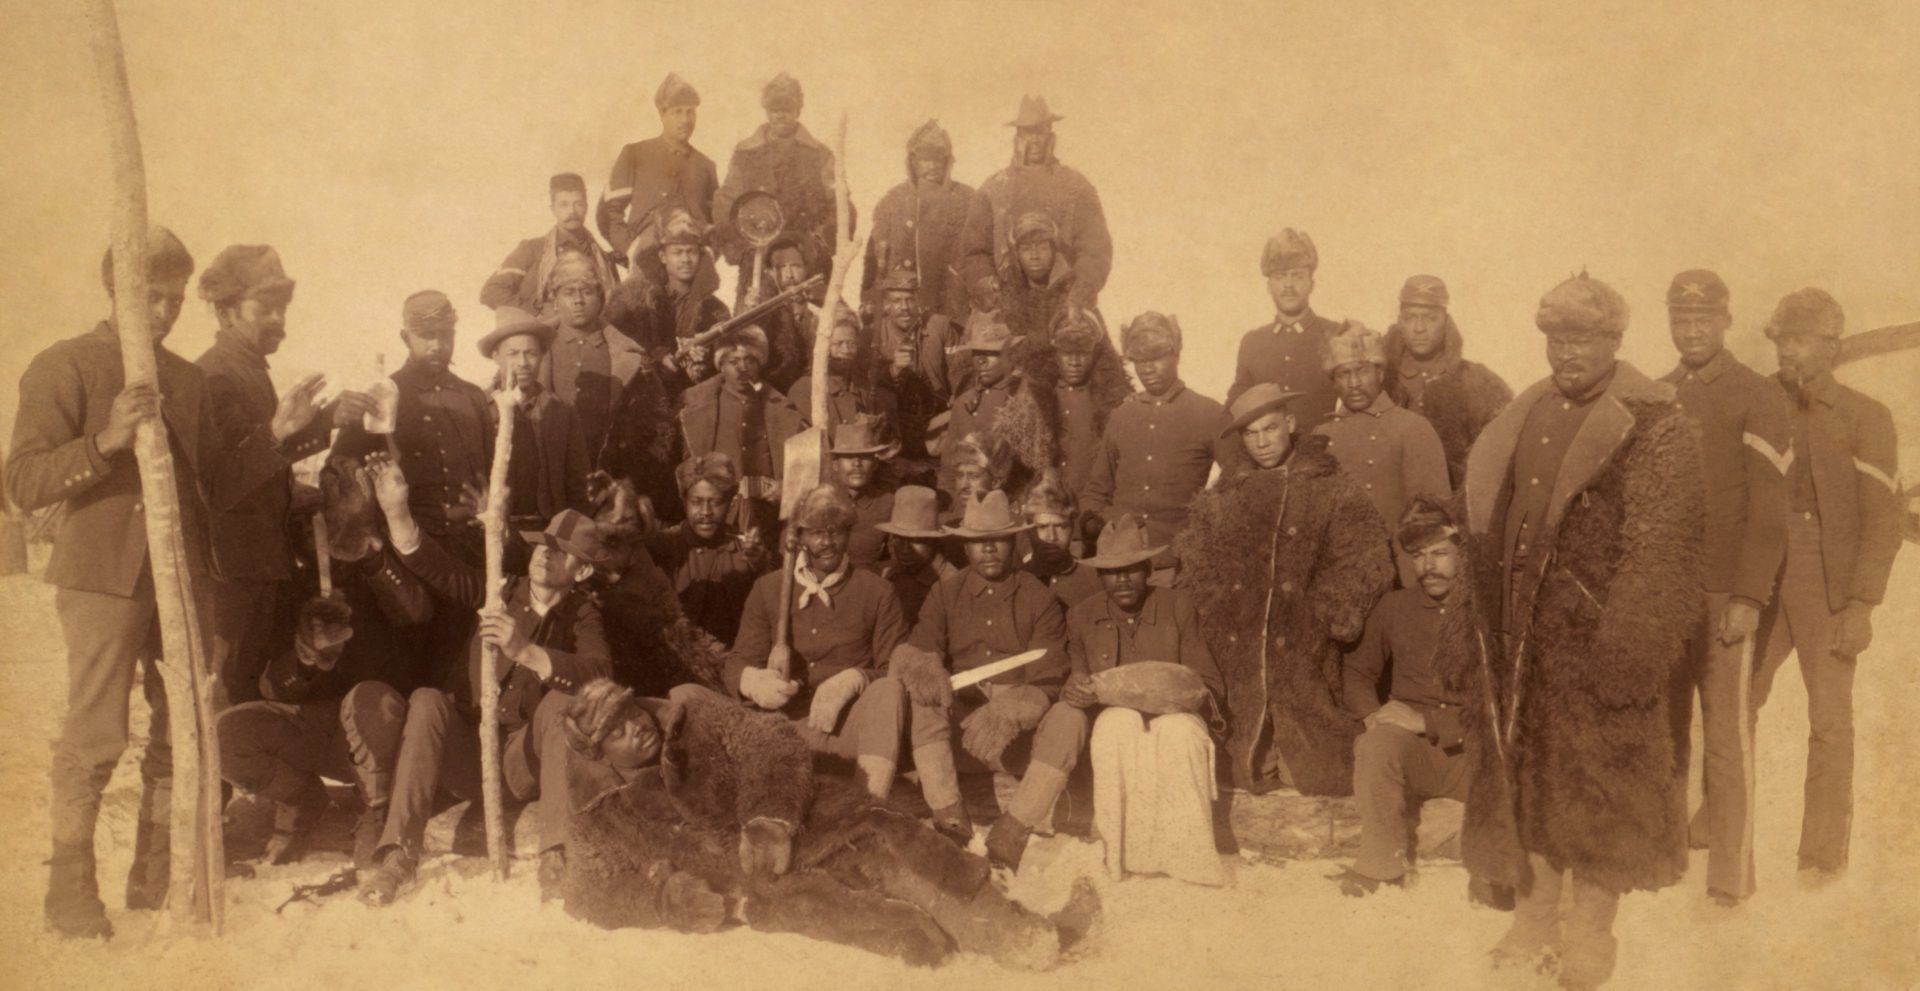 This image is of Buffalo Soldiers of the 25th Infantry and was taken at Fort Keogh, Montana.  The photograph features several soldiers in coats made of buffalo hides.